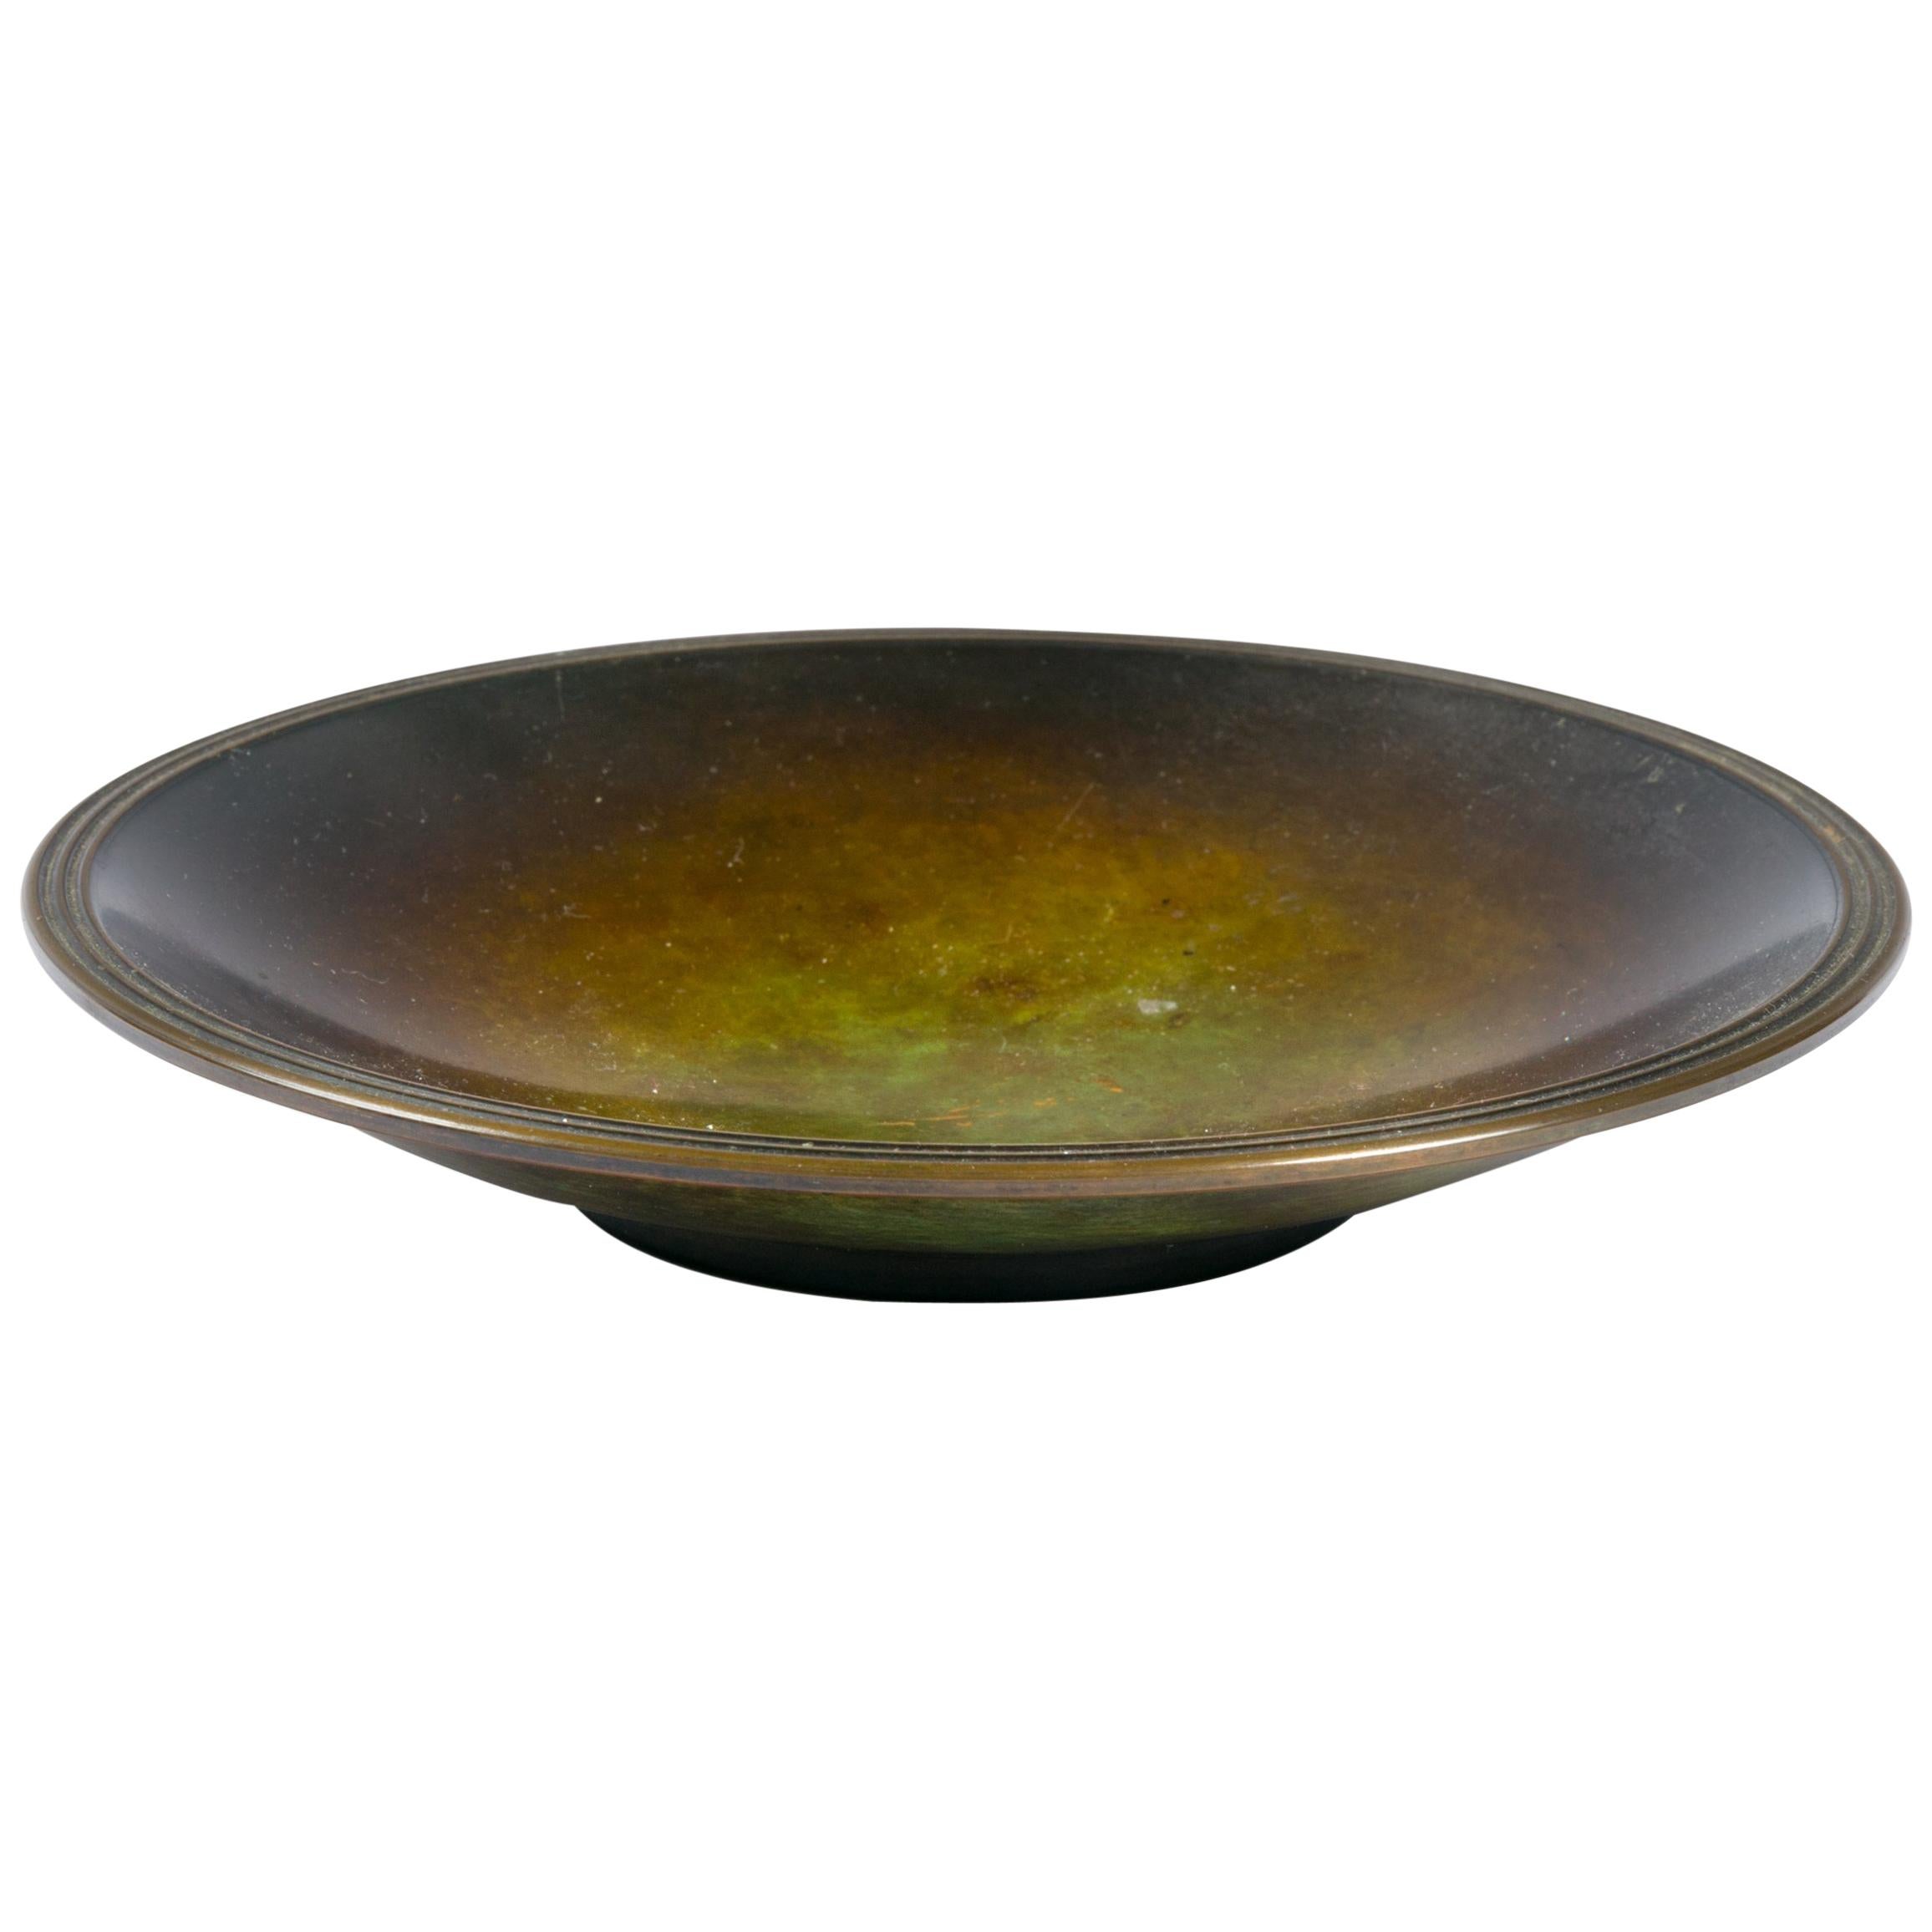 Just Anderson Signed Patinated Bronze Dish or Bowl, Denmark, 1930s